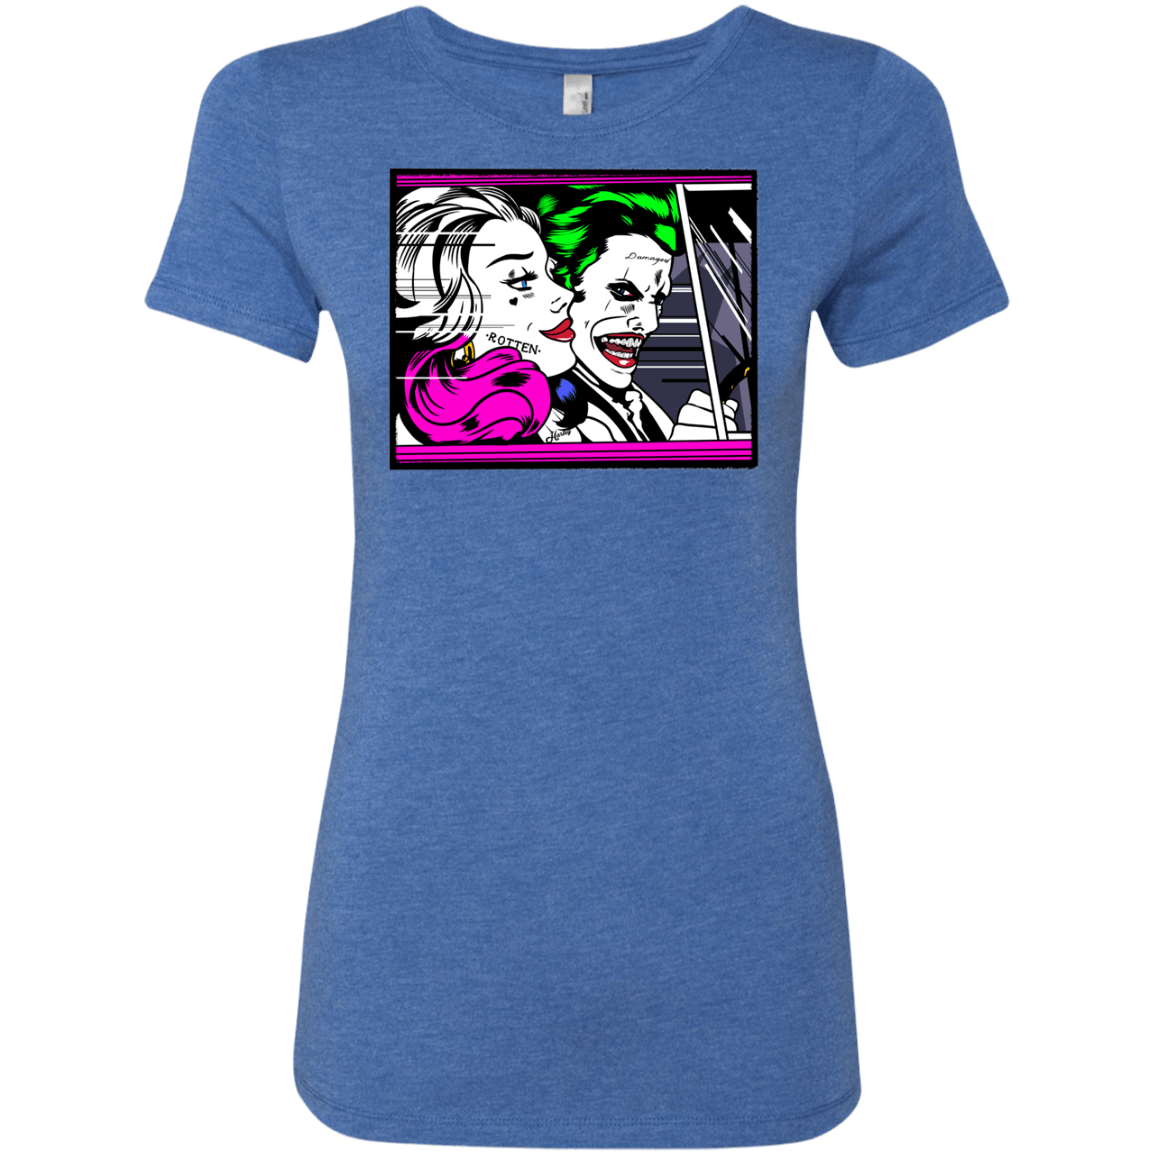 T-Shirts Vintage Royal / Small In The Jokecar Women's Triblend T-Shirt